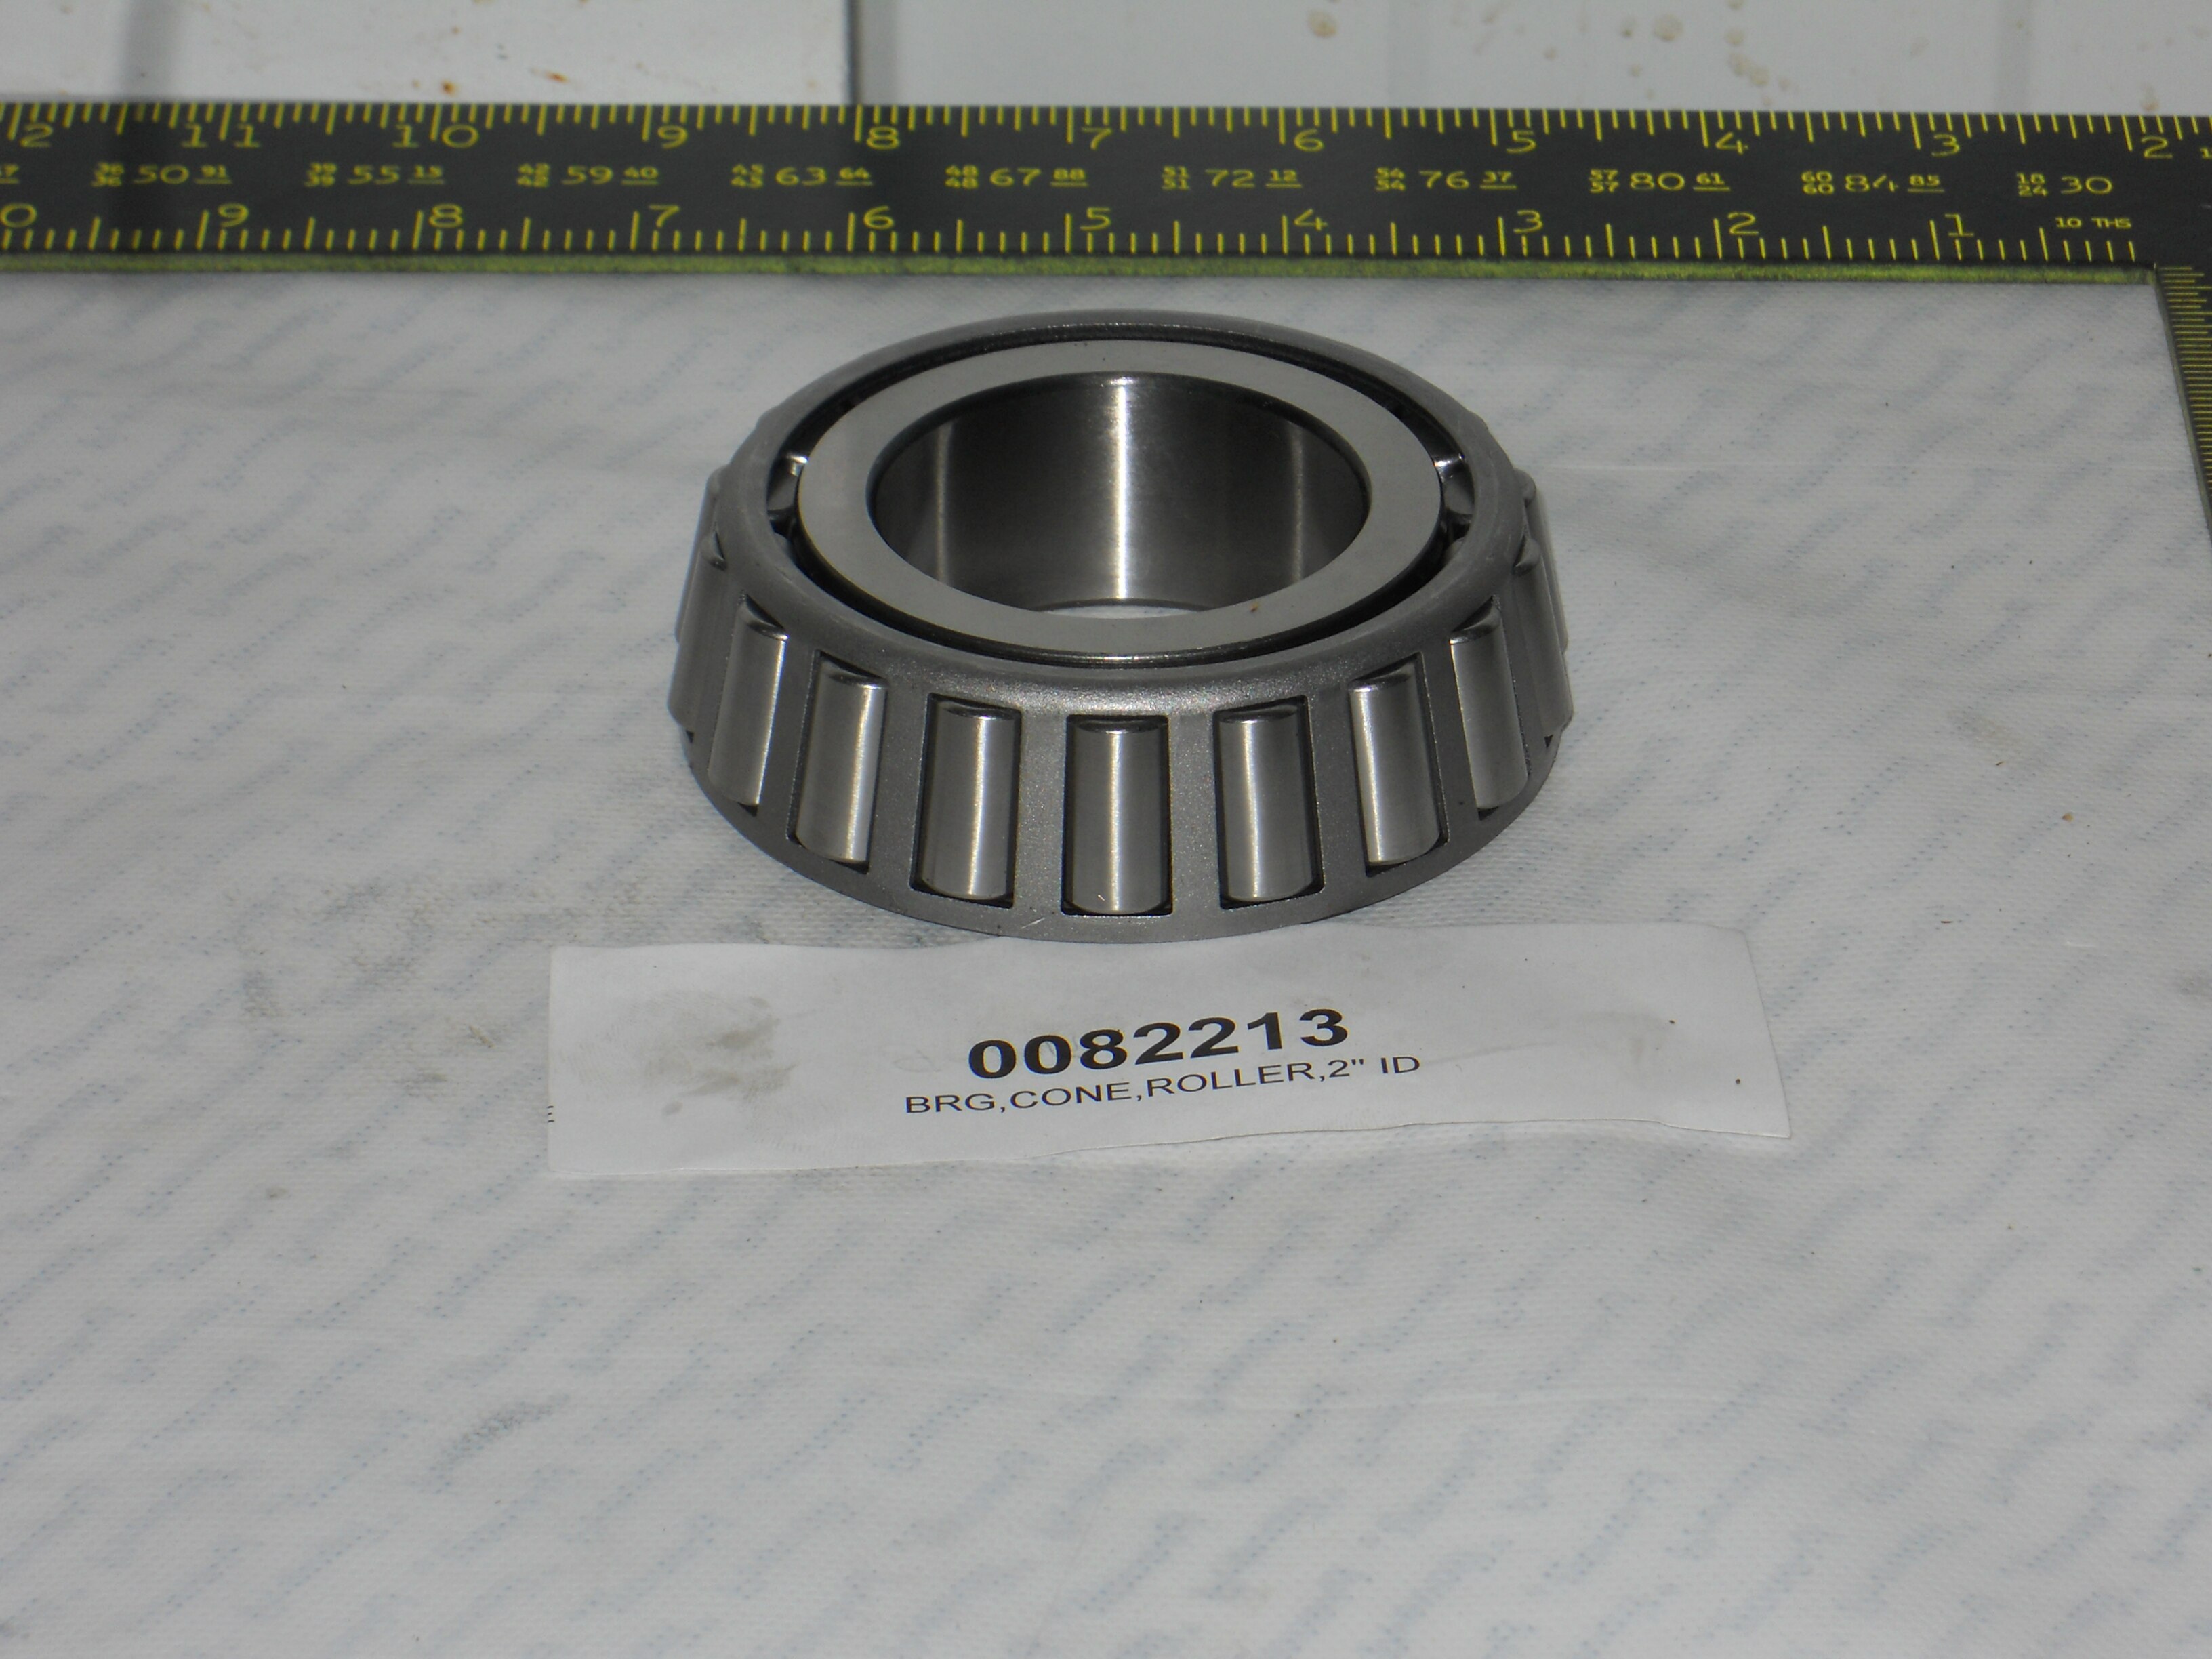 BRG,CONE,ROLLER,2" ID